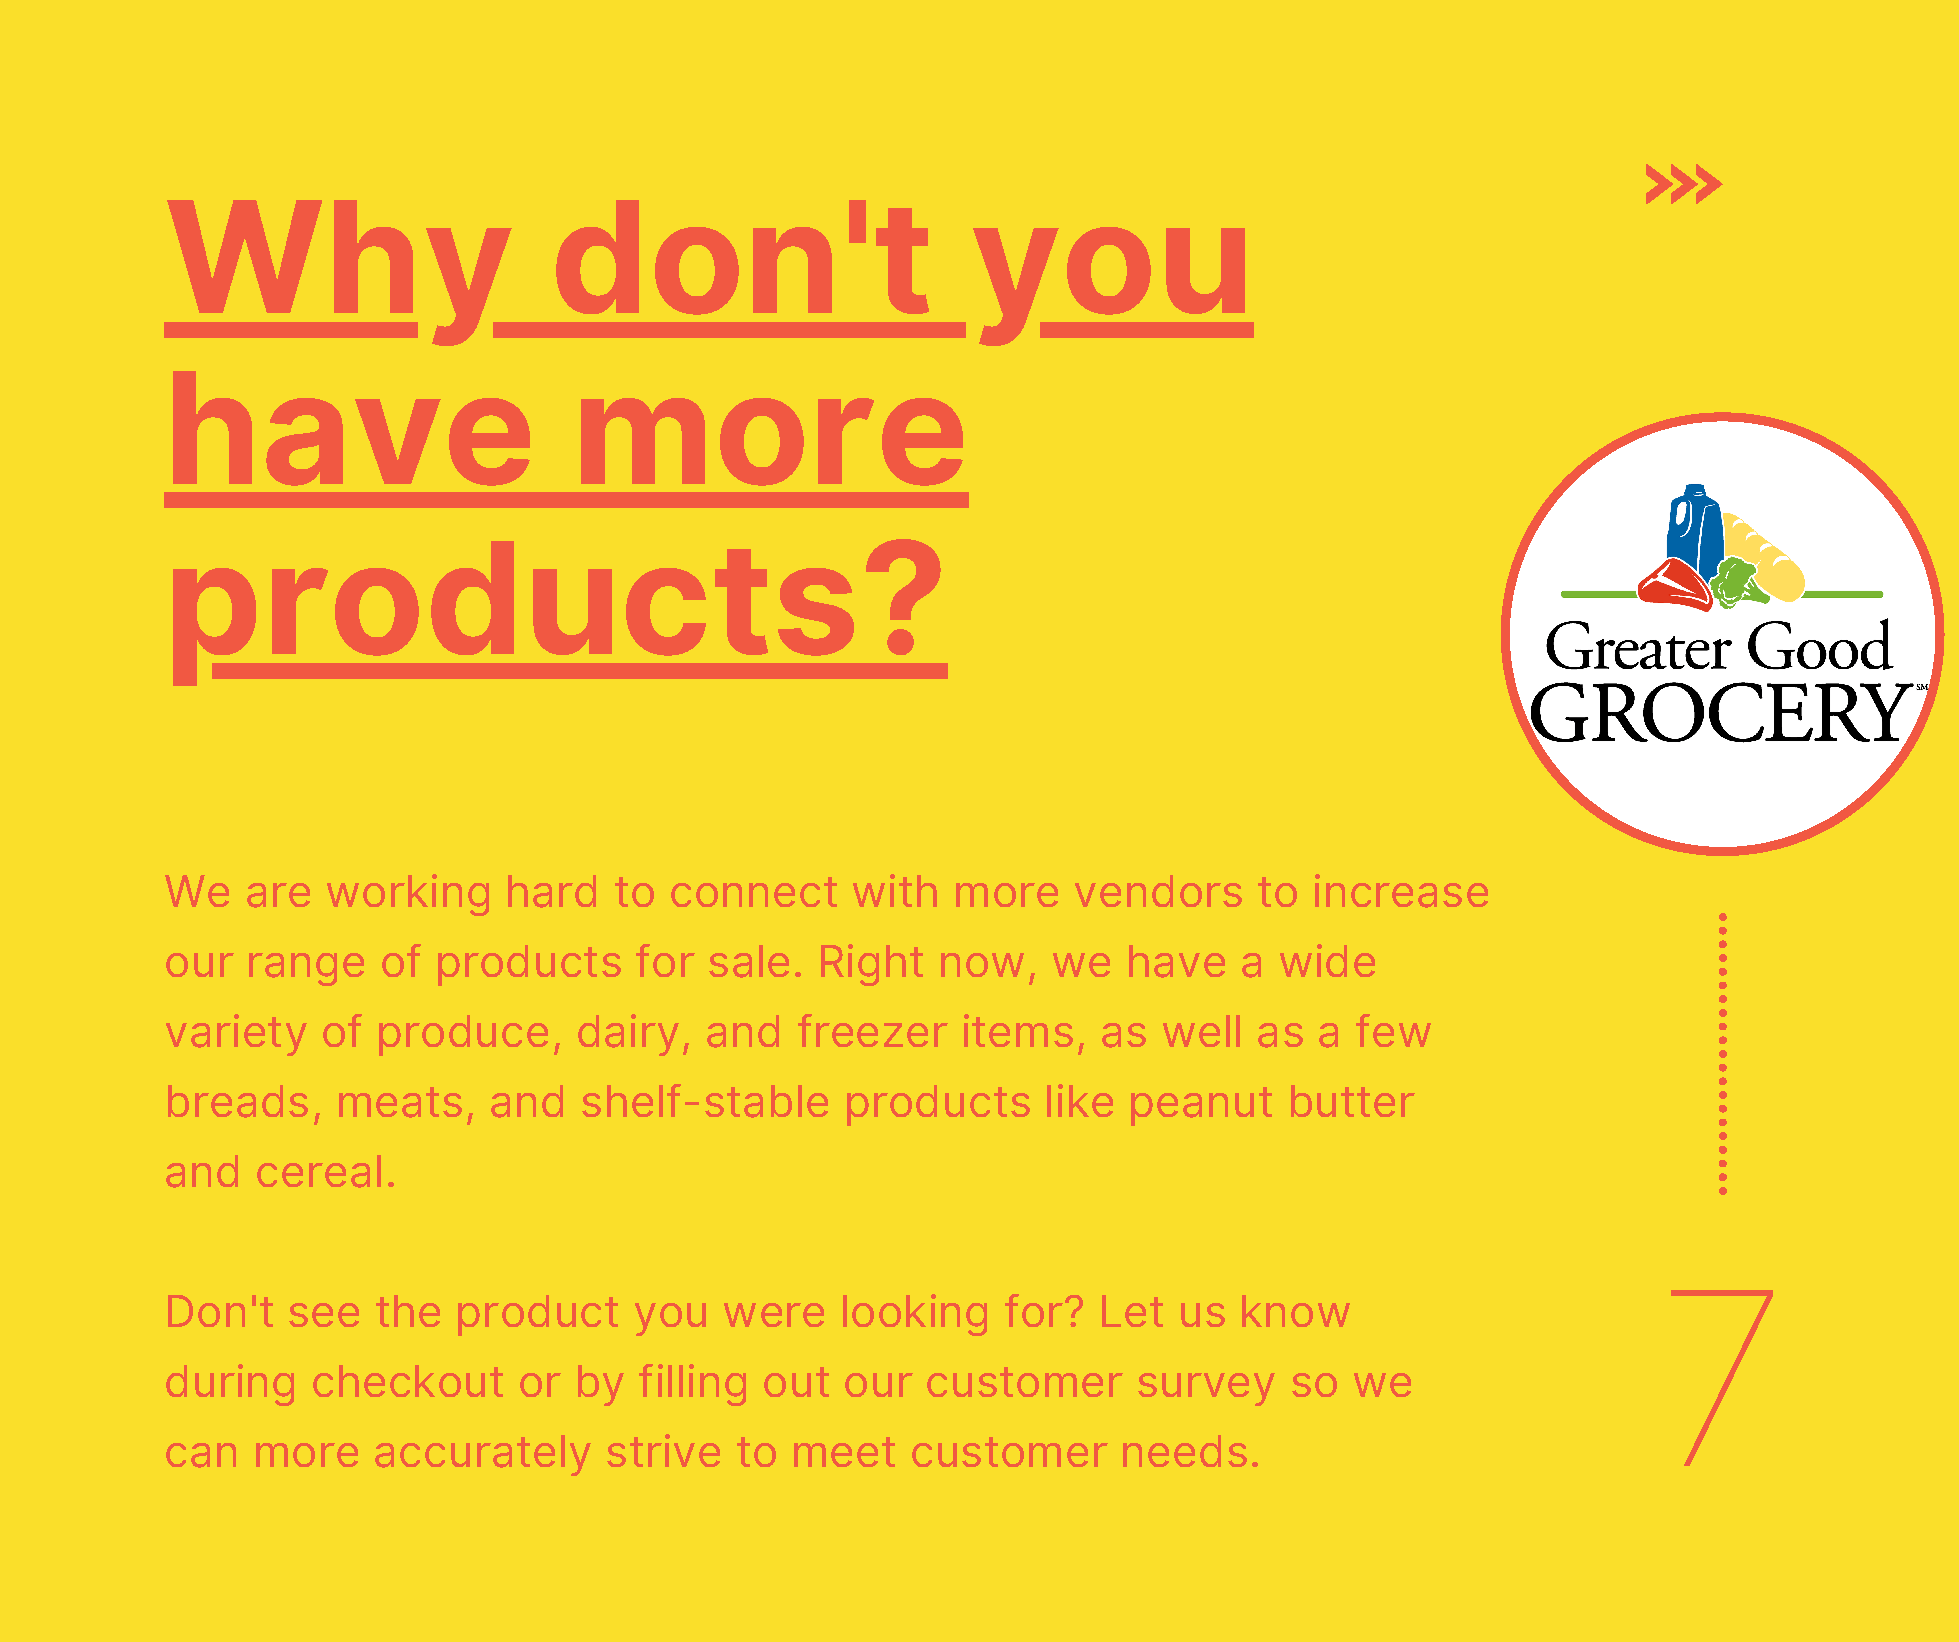 https://149349318.v2.pressablecdn.com/wp-content/uploads/FAQ-Greater-Good_Grocery-product-types.png